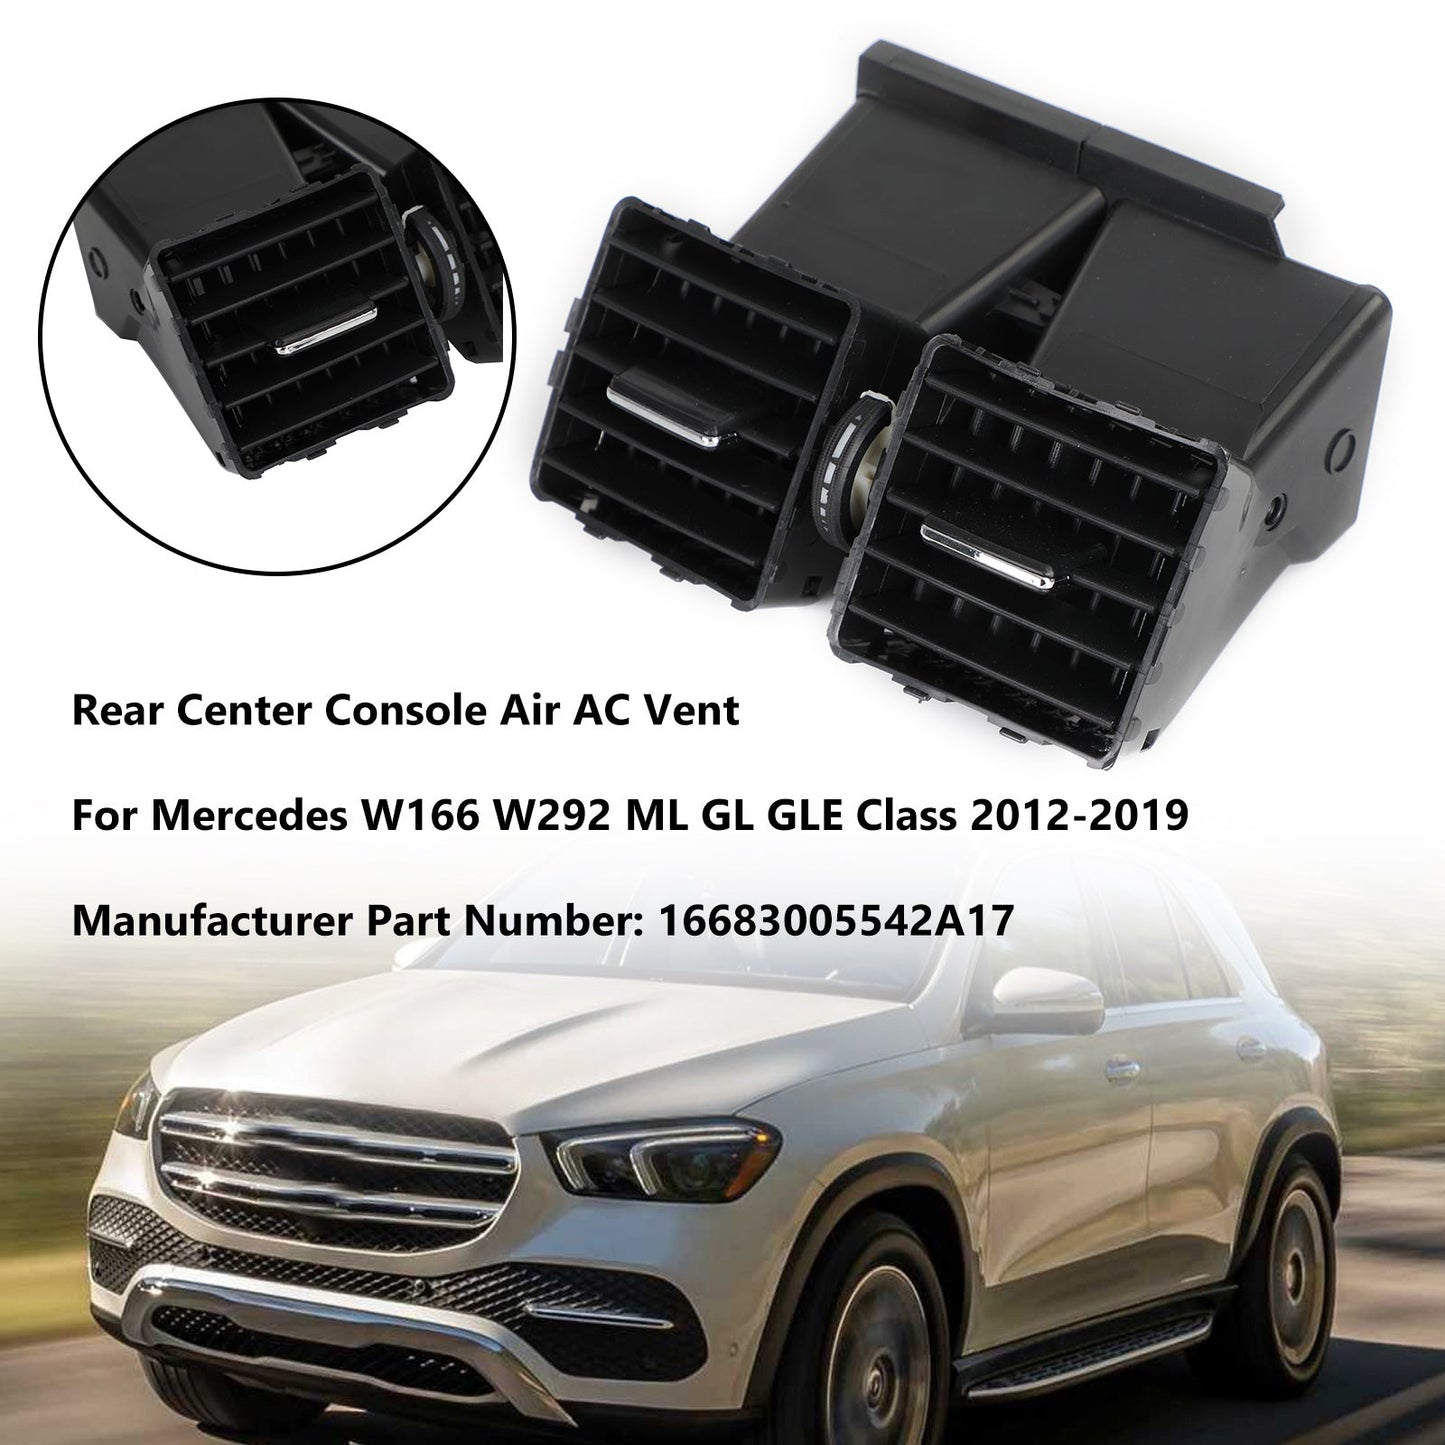 Rear Center Console Air AC Vent Outlet For Mercedes Benz W166 W292 GLE 2012-2019